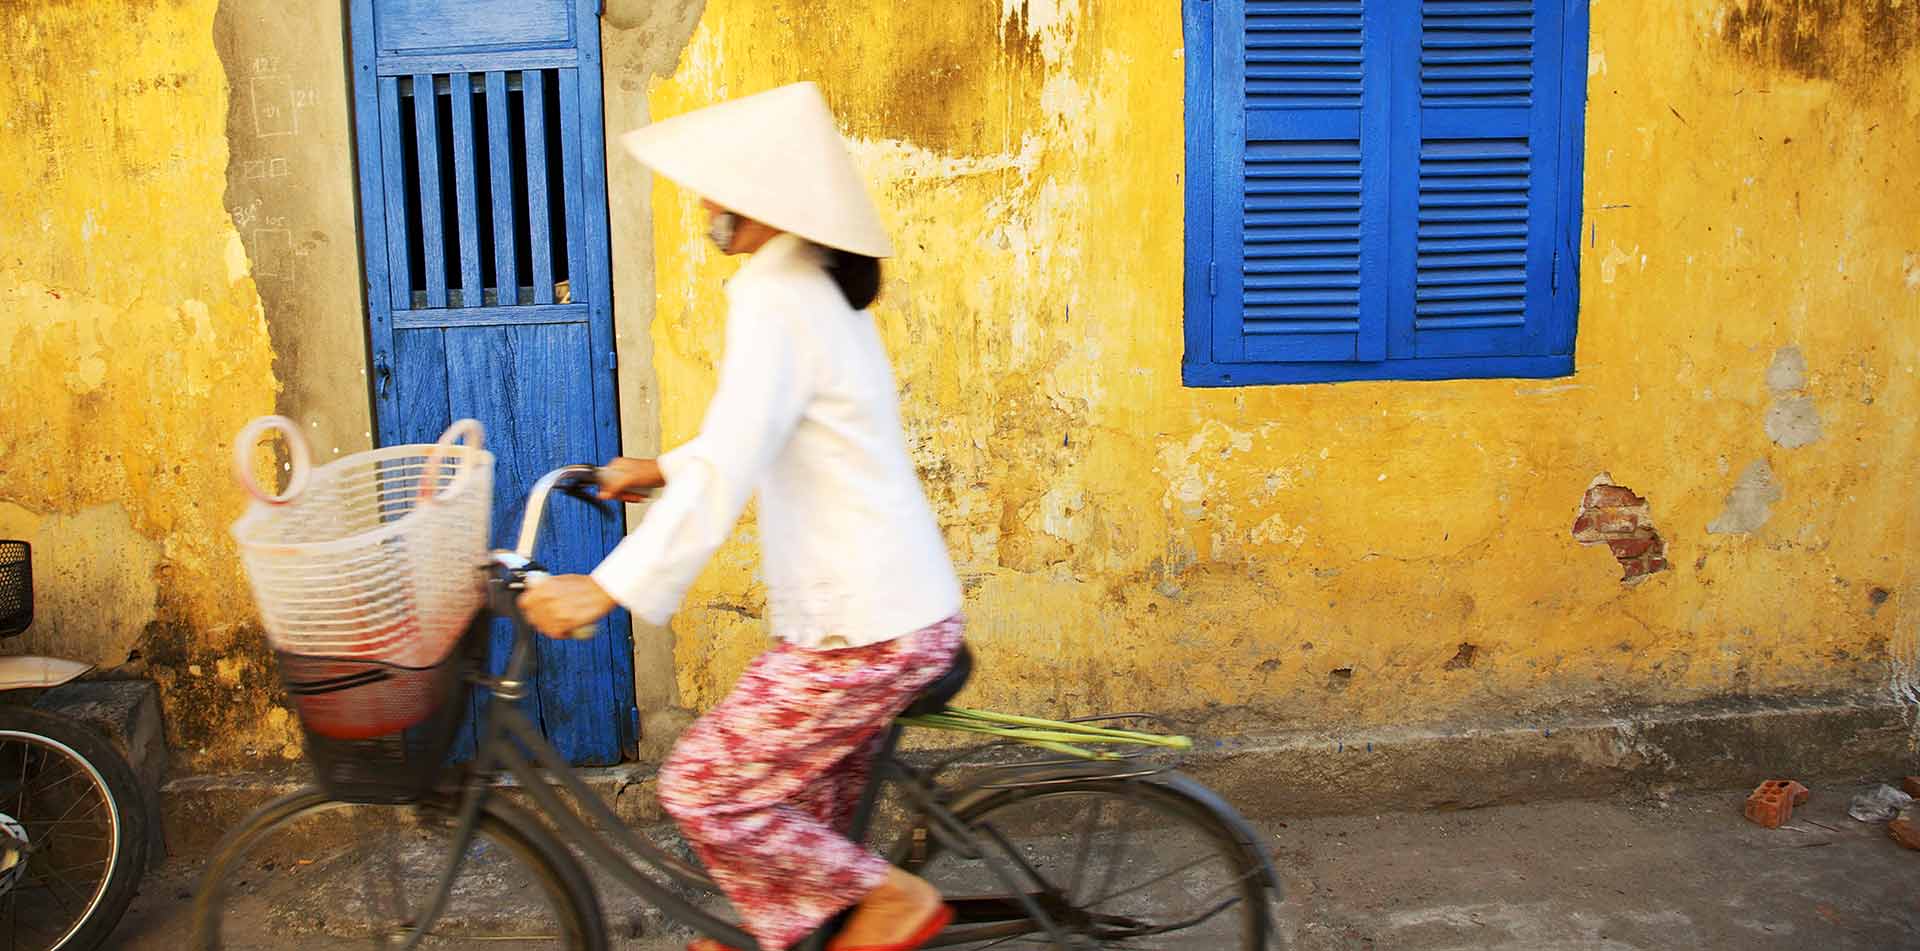 Woman on a Bicycle in Vietnam